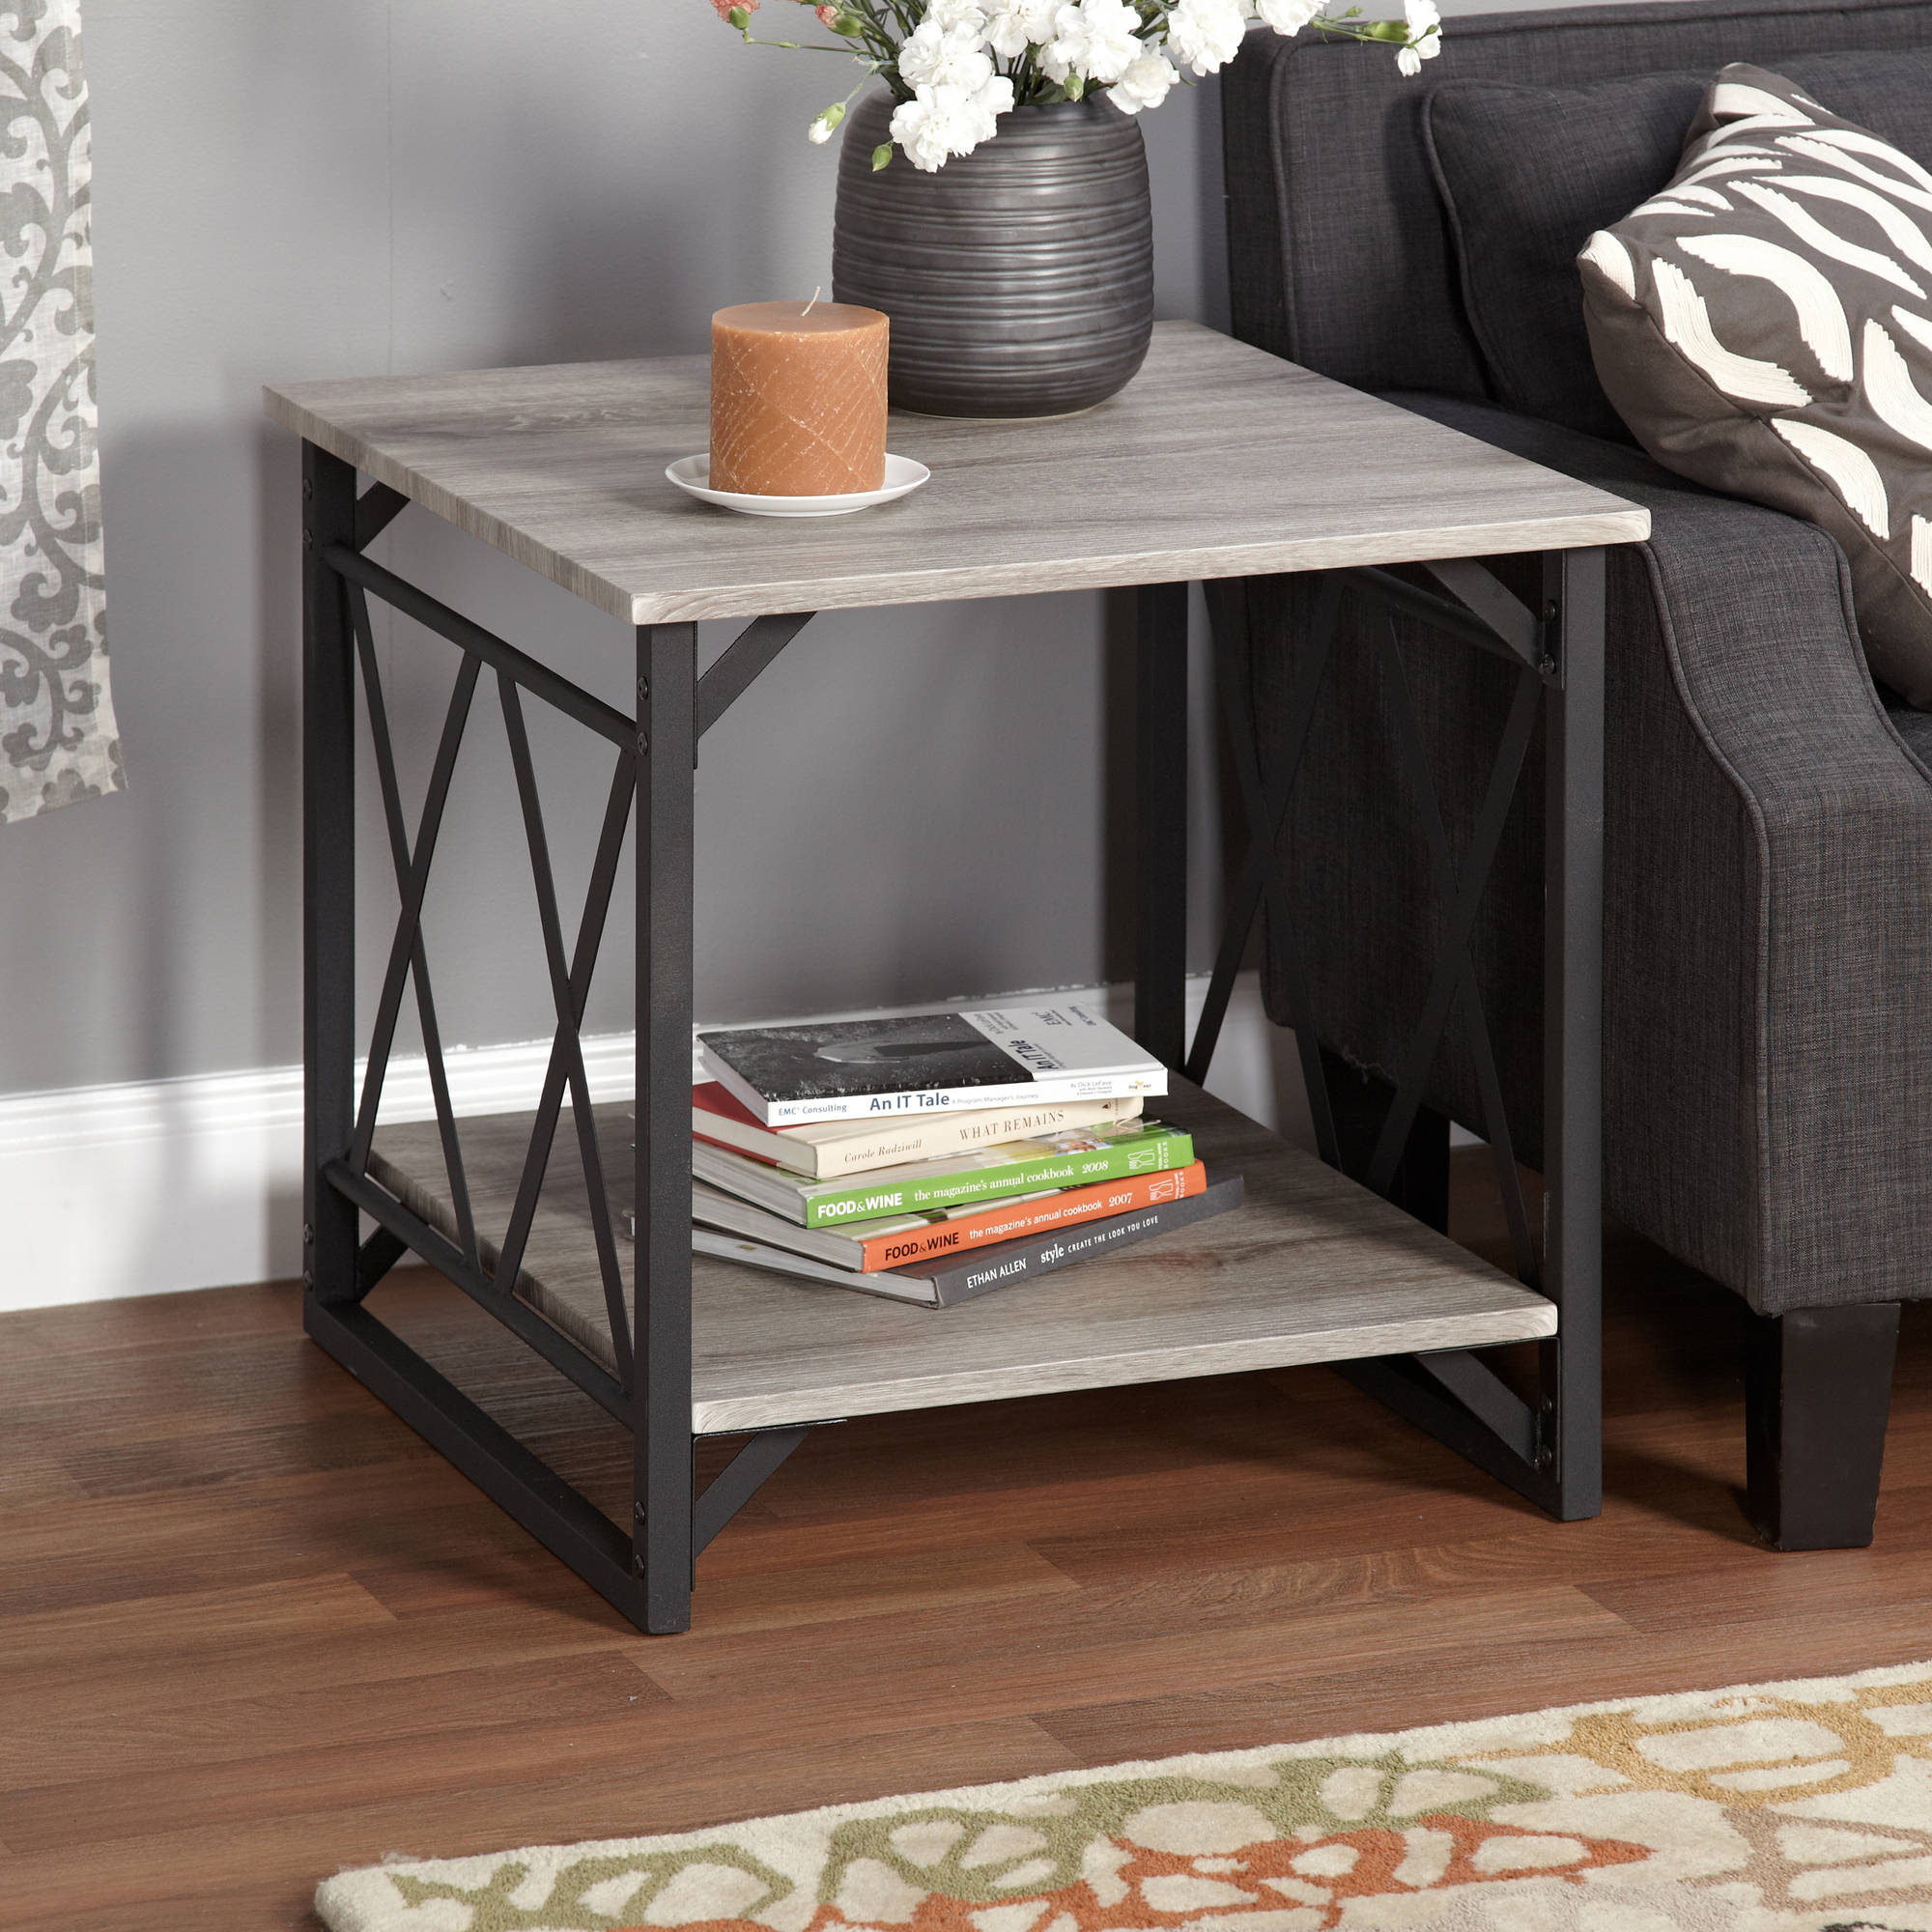 lenyxx collection end table multiple colors black tables living room henredon bedroom furniture ashley unfinished dining low marble coffee what with dark brown leather iron pipe